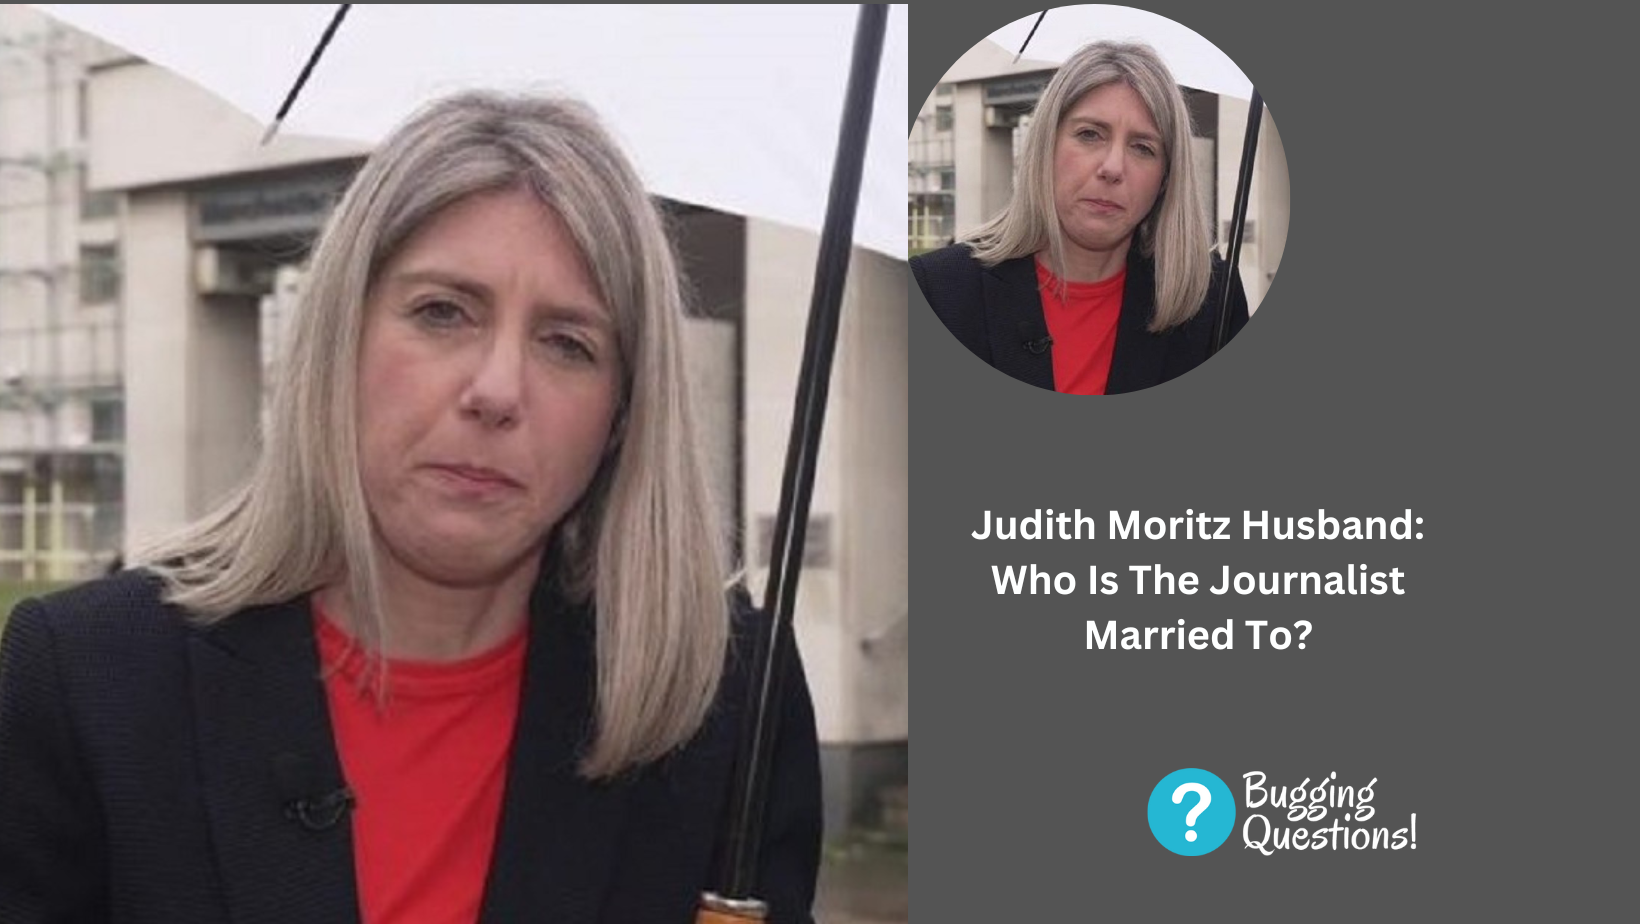 Judith Moritz Husband: Who Is The Journalist Married To?